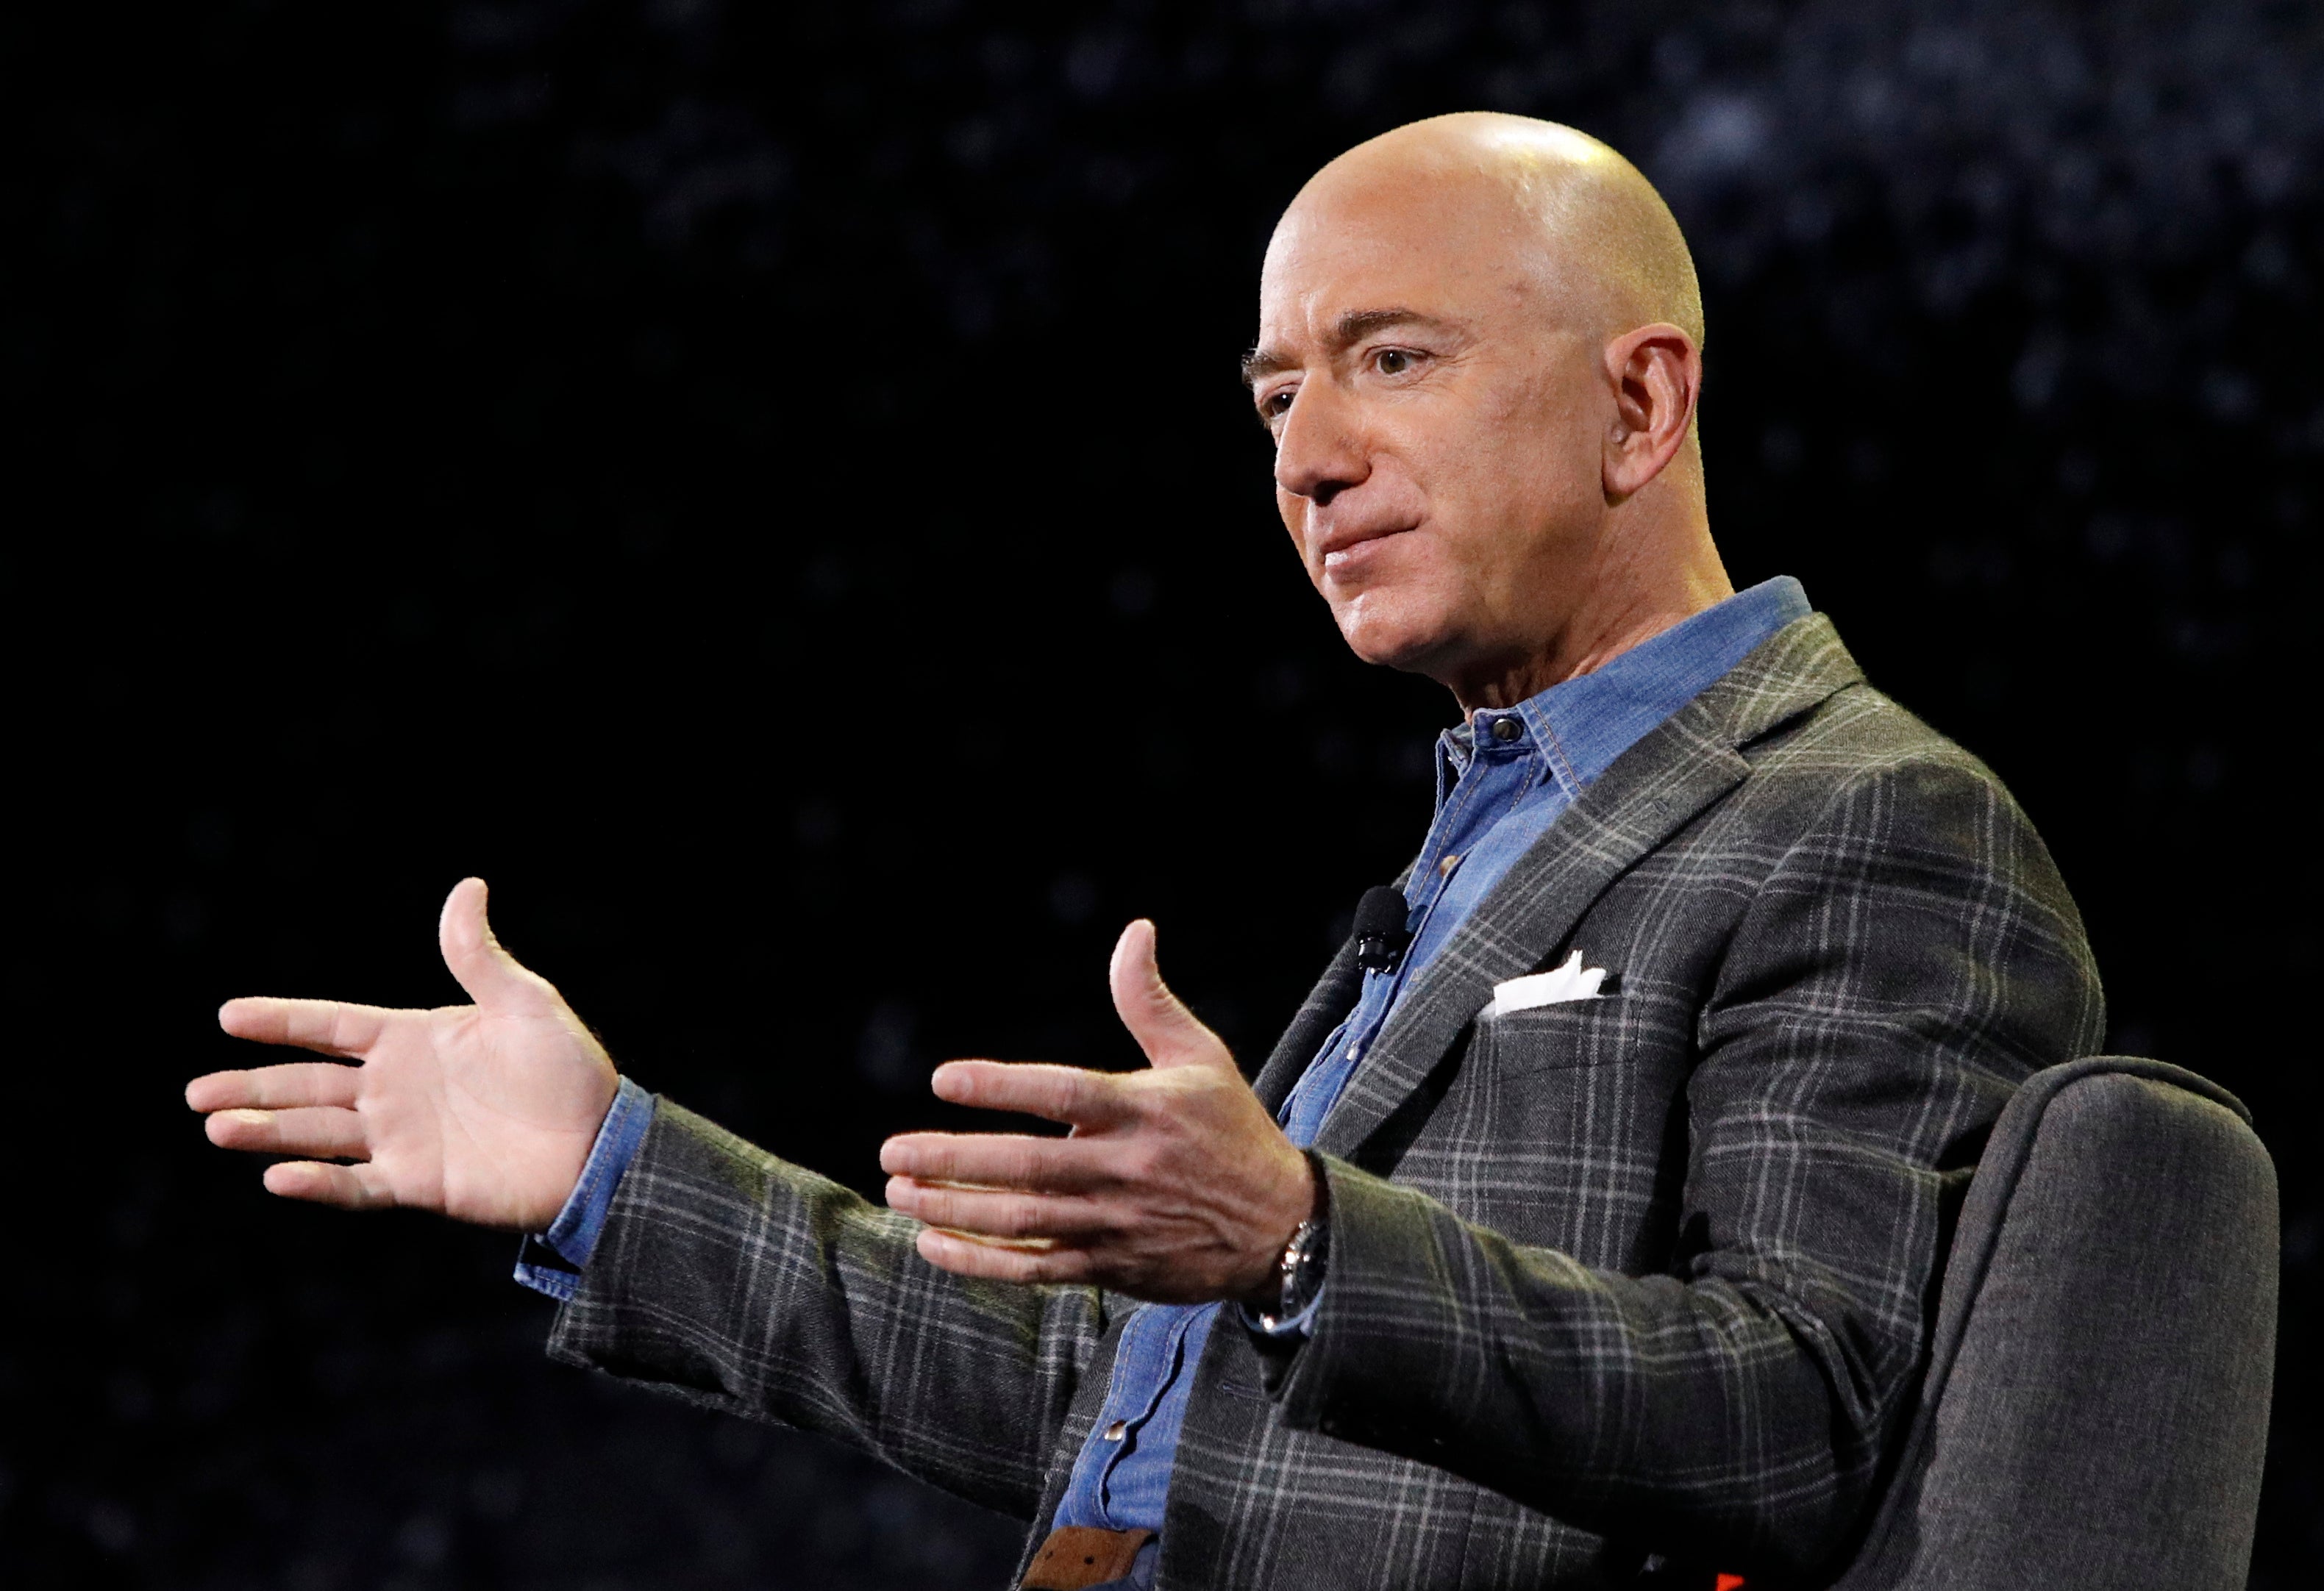 Amazon founder Jeff Bezos is handing over the role of Amazon CEO but will stay as executive chairman